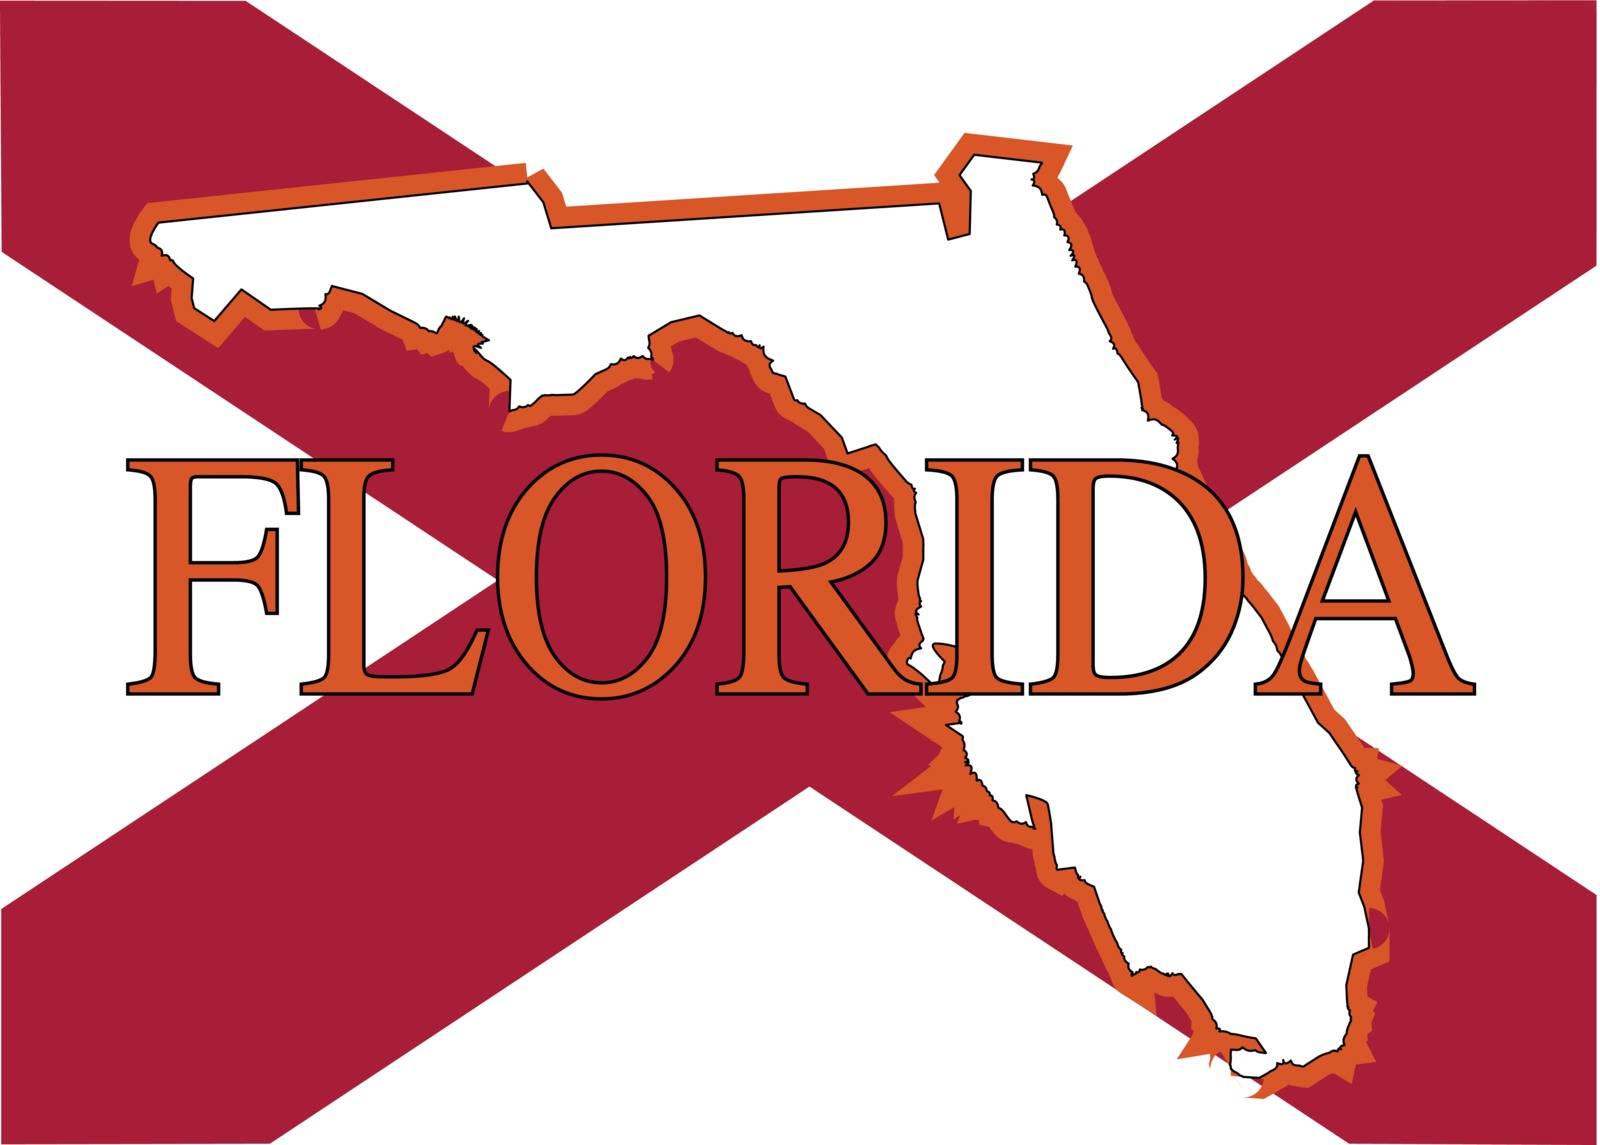 An outline map of Florida with the cross from the flag